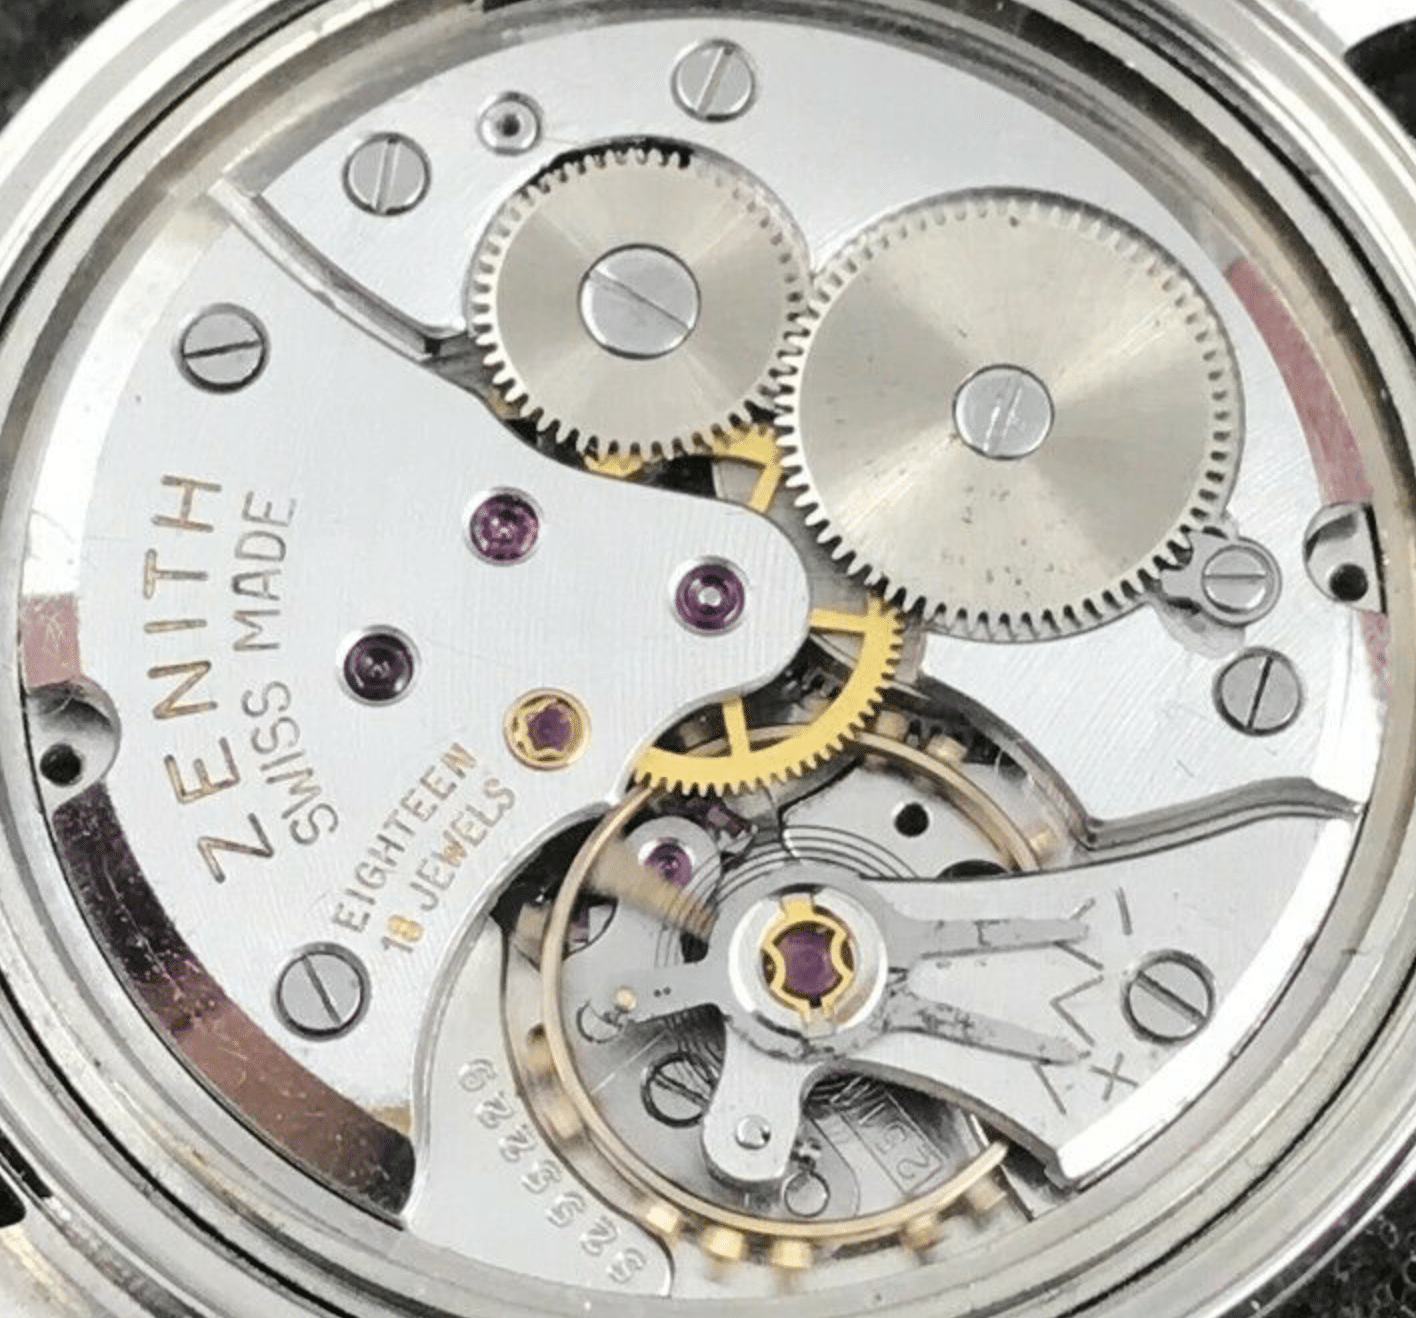 Zenith caliber 2511 movement – specifications and photo